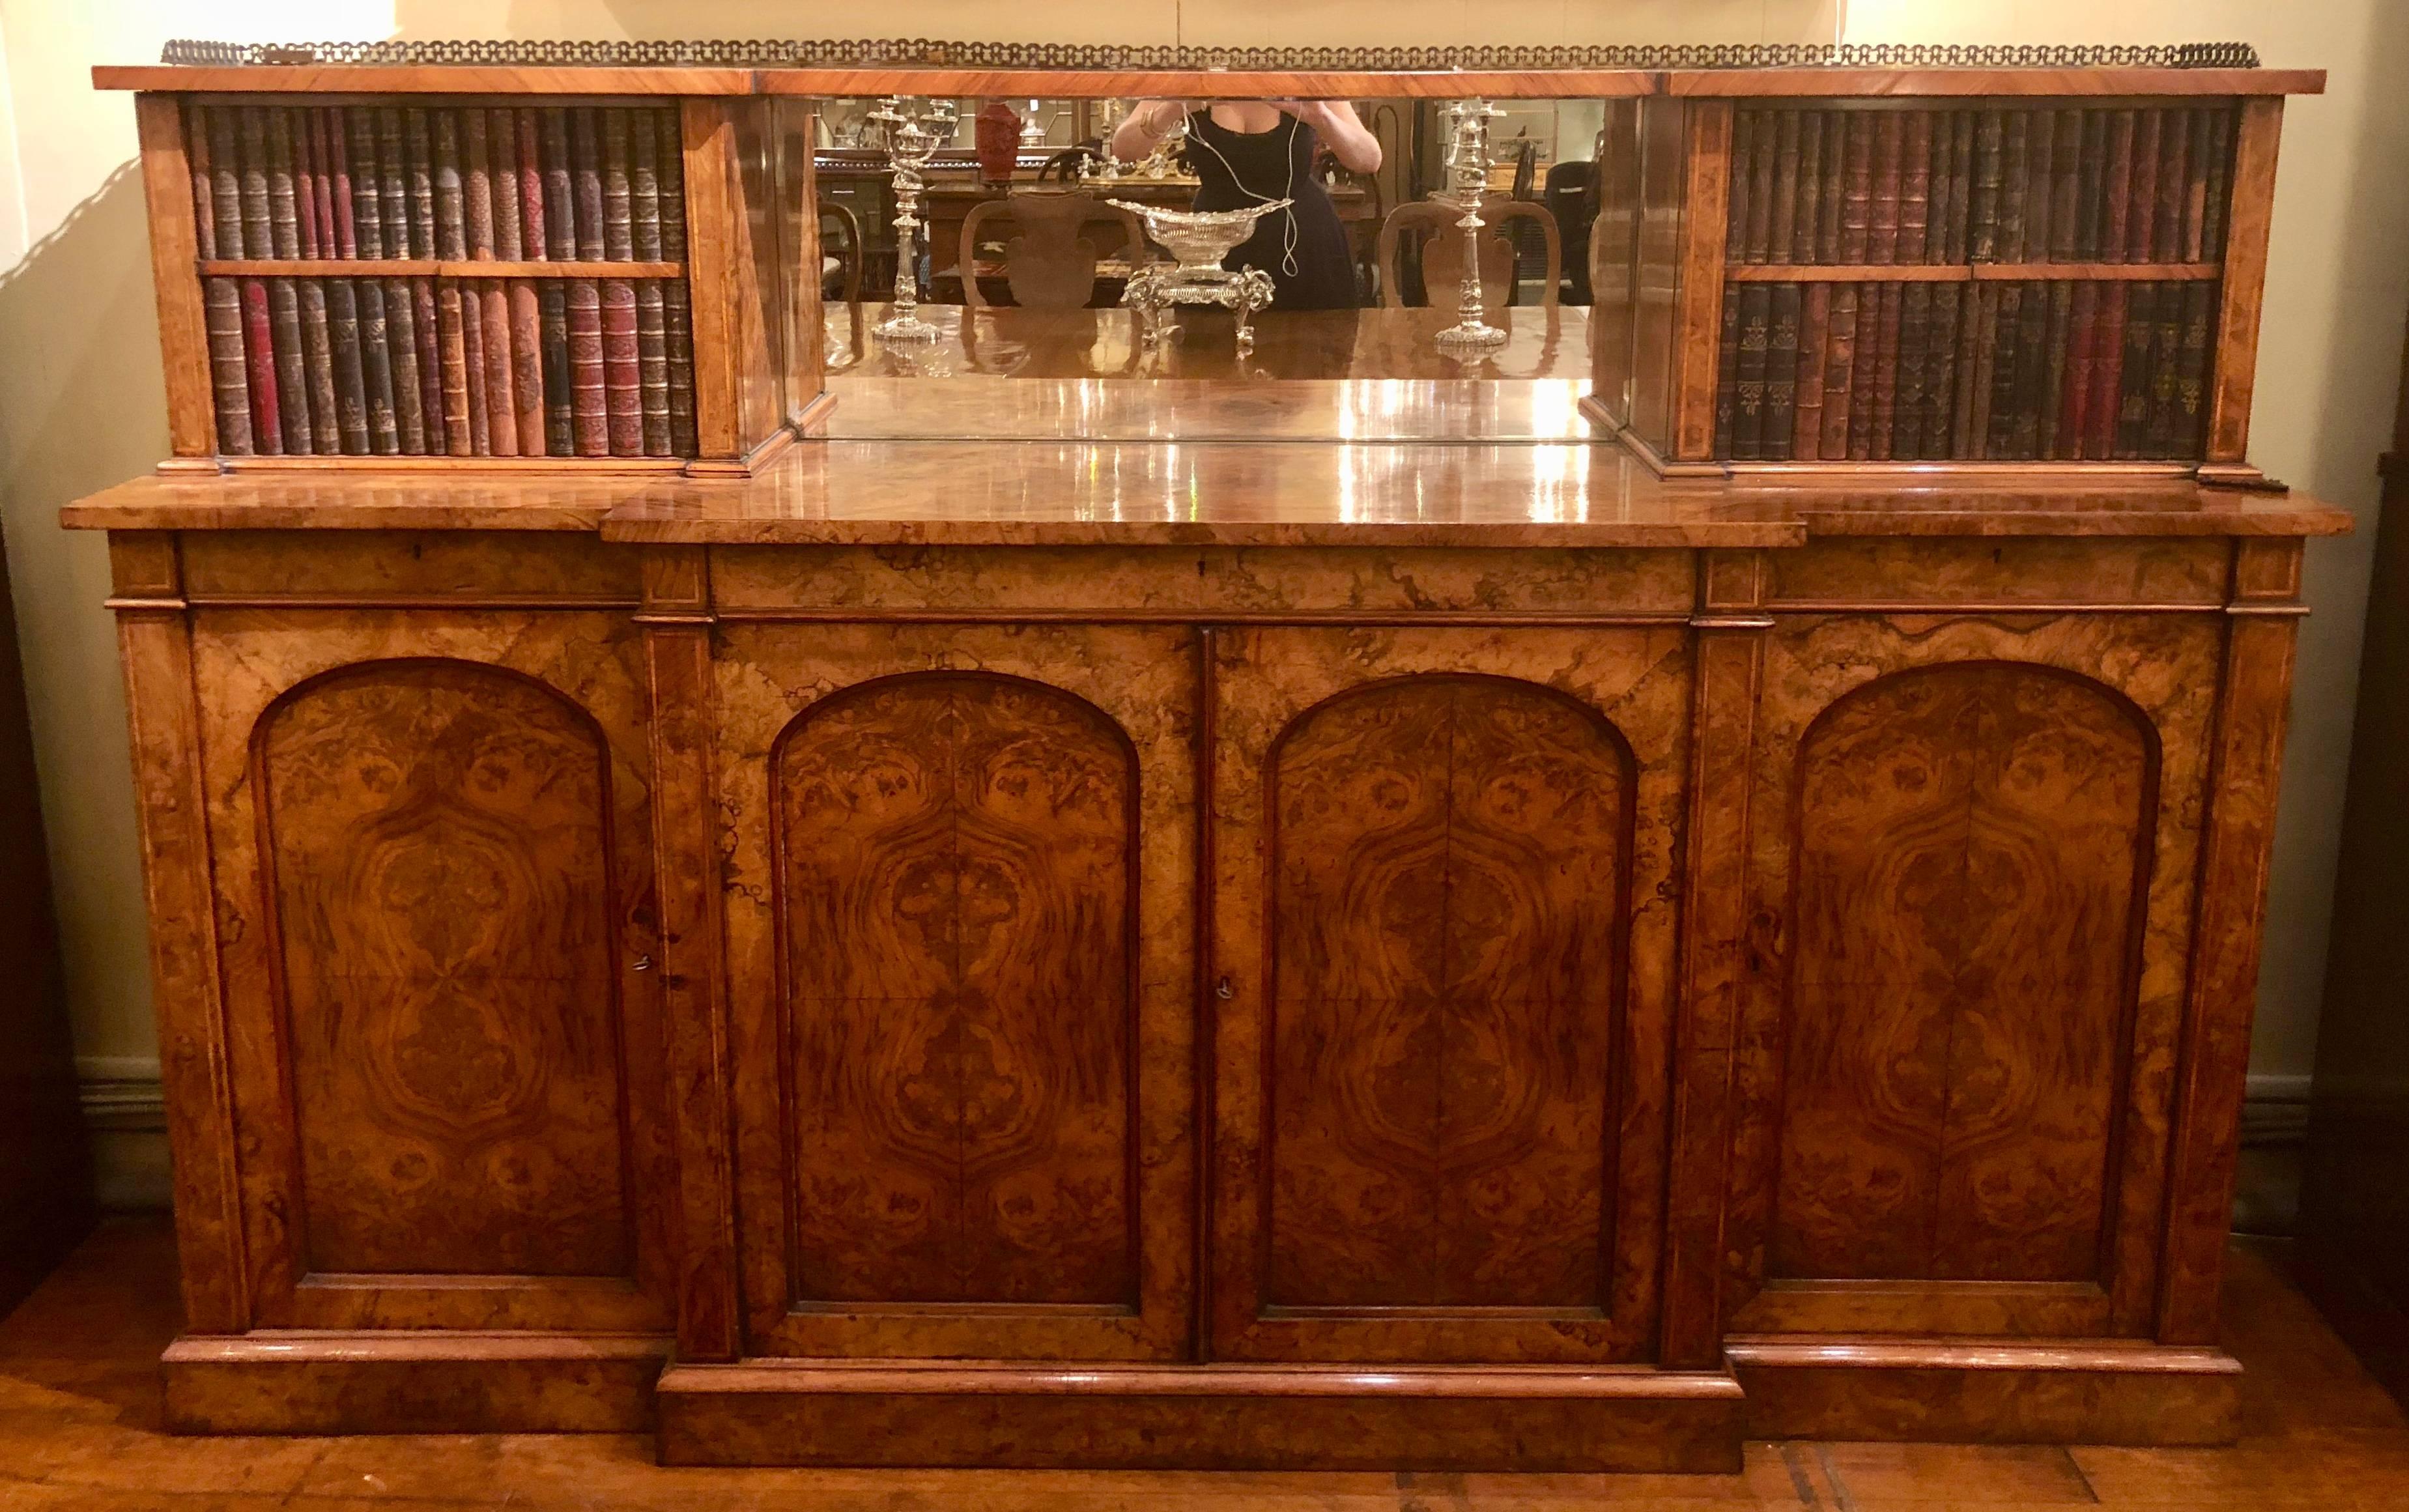 This is a very handsome burled walnut buffet. The top side cabinets look as though they are old book spines, but they are actually carved wood. As is true of many burl pieces, the movement in the wood is amazing.